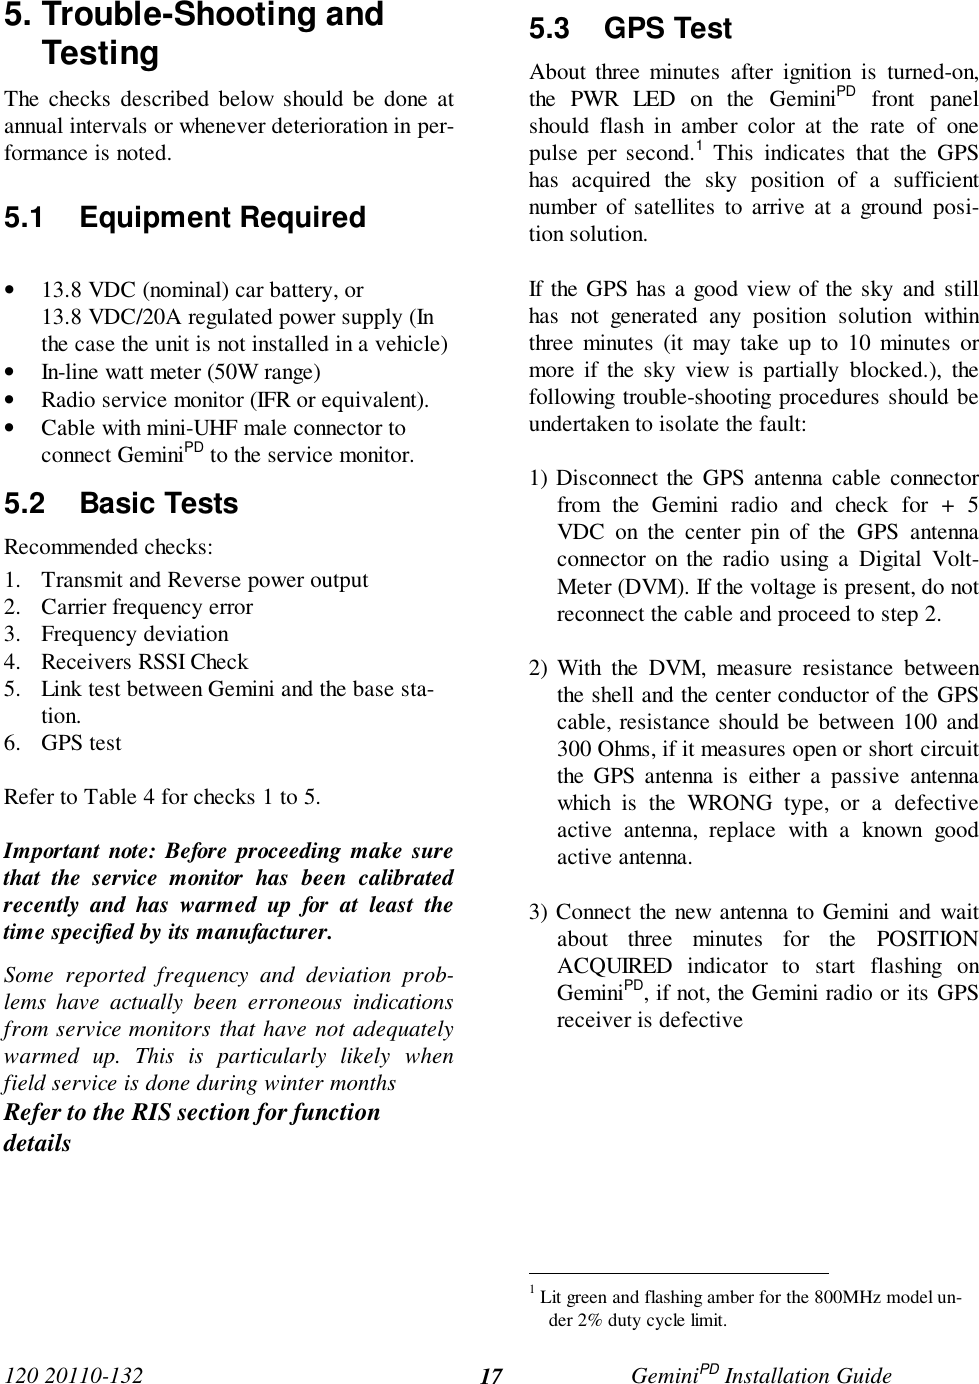 120 20110-132 GeminiPD Installation Guide175. Trouble-Shooting andTestingThe checks described below should be done atannual intervals or whenever deterioration in per-formance is noted.5.1 Equipment Required• 13.8 VDC (nominal) car battery, or13.8 VDC/20A regulated power supply (Inthe case the unit is not installed in a vehicle)• In-line watt meter (50W range)• Radio service monitor (IFR or equivalent).• Cable with mini-UHF male connector toconnect GeminiPD to the service monitor.5.2 Basic TestsRecommended checks:1. Transmit and Reverse power output2. Carrier frequency error3. Frequency deviation4. Receivers RSSI Check5. Link test between Gemini and the base sta-tion.6. GPS testRefer to Table 4 for checks 1 to 5.Important note: Before proceeding make surethat the service monitor has been calibratedrecently and has warmed up for at least thetime specified by its manufacturer.Some reported frequency and deviation prob-lems have actually been erroneous indicationsfrom service monitors that have not adequatelywarmed up. This is particularly likely whenfield service is done during winter monthsRefer to the RIS section for functiondetails5.3 GPS TestAbout three minutes after ignition is turned-on,the PWR LED on the GeminiPD front panelshould flash in amber color at the rate of onepulse per second.1 This indicates that the GPShas acquired the sky position of a sufficientnumber of satellites to arrive at a ground posi-tion solution.If the GPS has a good view of the sky and stillhas not generated any position solution withinthree minutes (it may take up to 10 minutes ormore if the sky view is partially blocked.), thefollowing trouble-shooting procedures should beundertaken to isolate the fault:1) Disconnect the GPS antenna cable connectorfrom the Gemini radio and check for + 5VDC on the center pin of the GPS antennaconnector on the radio using a Digital Volt-Meter (DVM). If the voltage is present, do notreconnect the cable and proceed to step 2.2) With the DVM, measure resistance betweenthe shell and the center conductor of the GPScable, resistance should be between 100 and300 Ohms, if it measures open or short circuitthe GPS antenna is either a passive antennawhich is the WRONG type, or a defectiveactive antenna, replace with a known goodactive antenna.3) Connect the new antenna to Gemini and waitabout three minutes for the POSITIONACQUIRED indicator to start flashing onGeminiPD, if not, the Gemini radio or its GPSreceiver is defective                                                1 Lit green and flashing amber for the 800MHz model un-der 2% duty cycle limit.